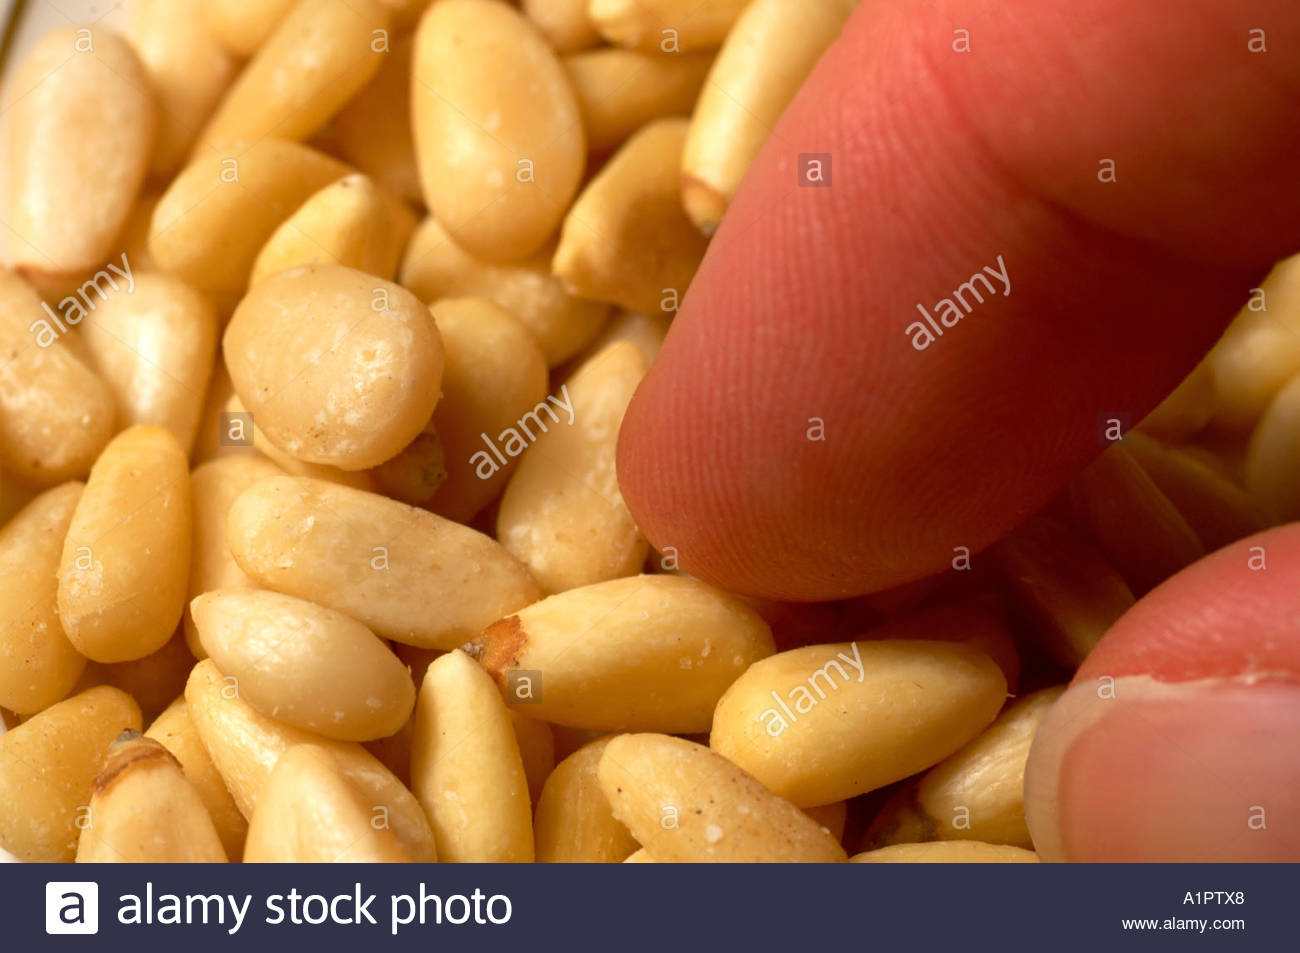 Picking up a pine nut Stock Photo